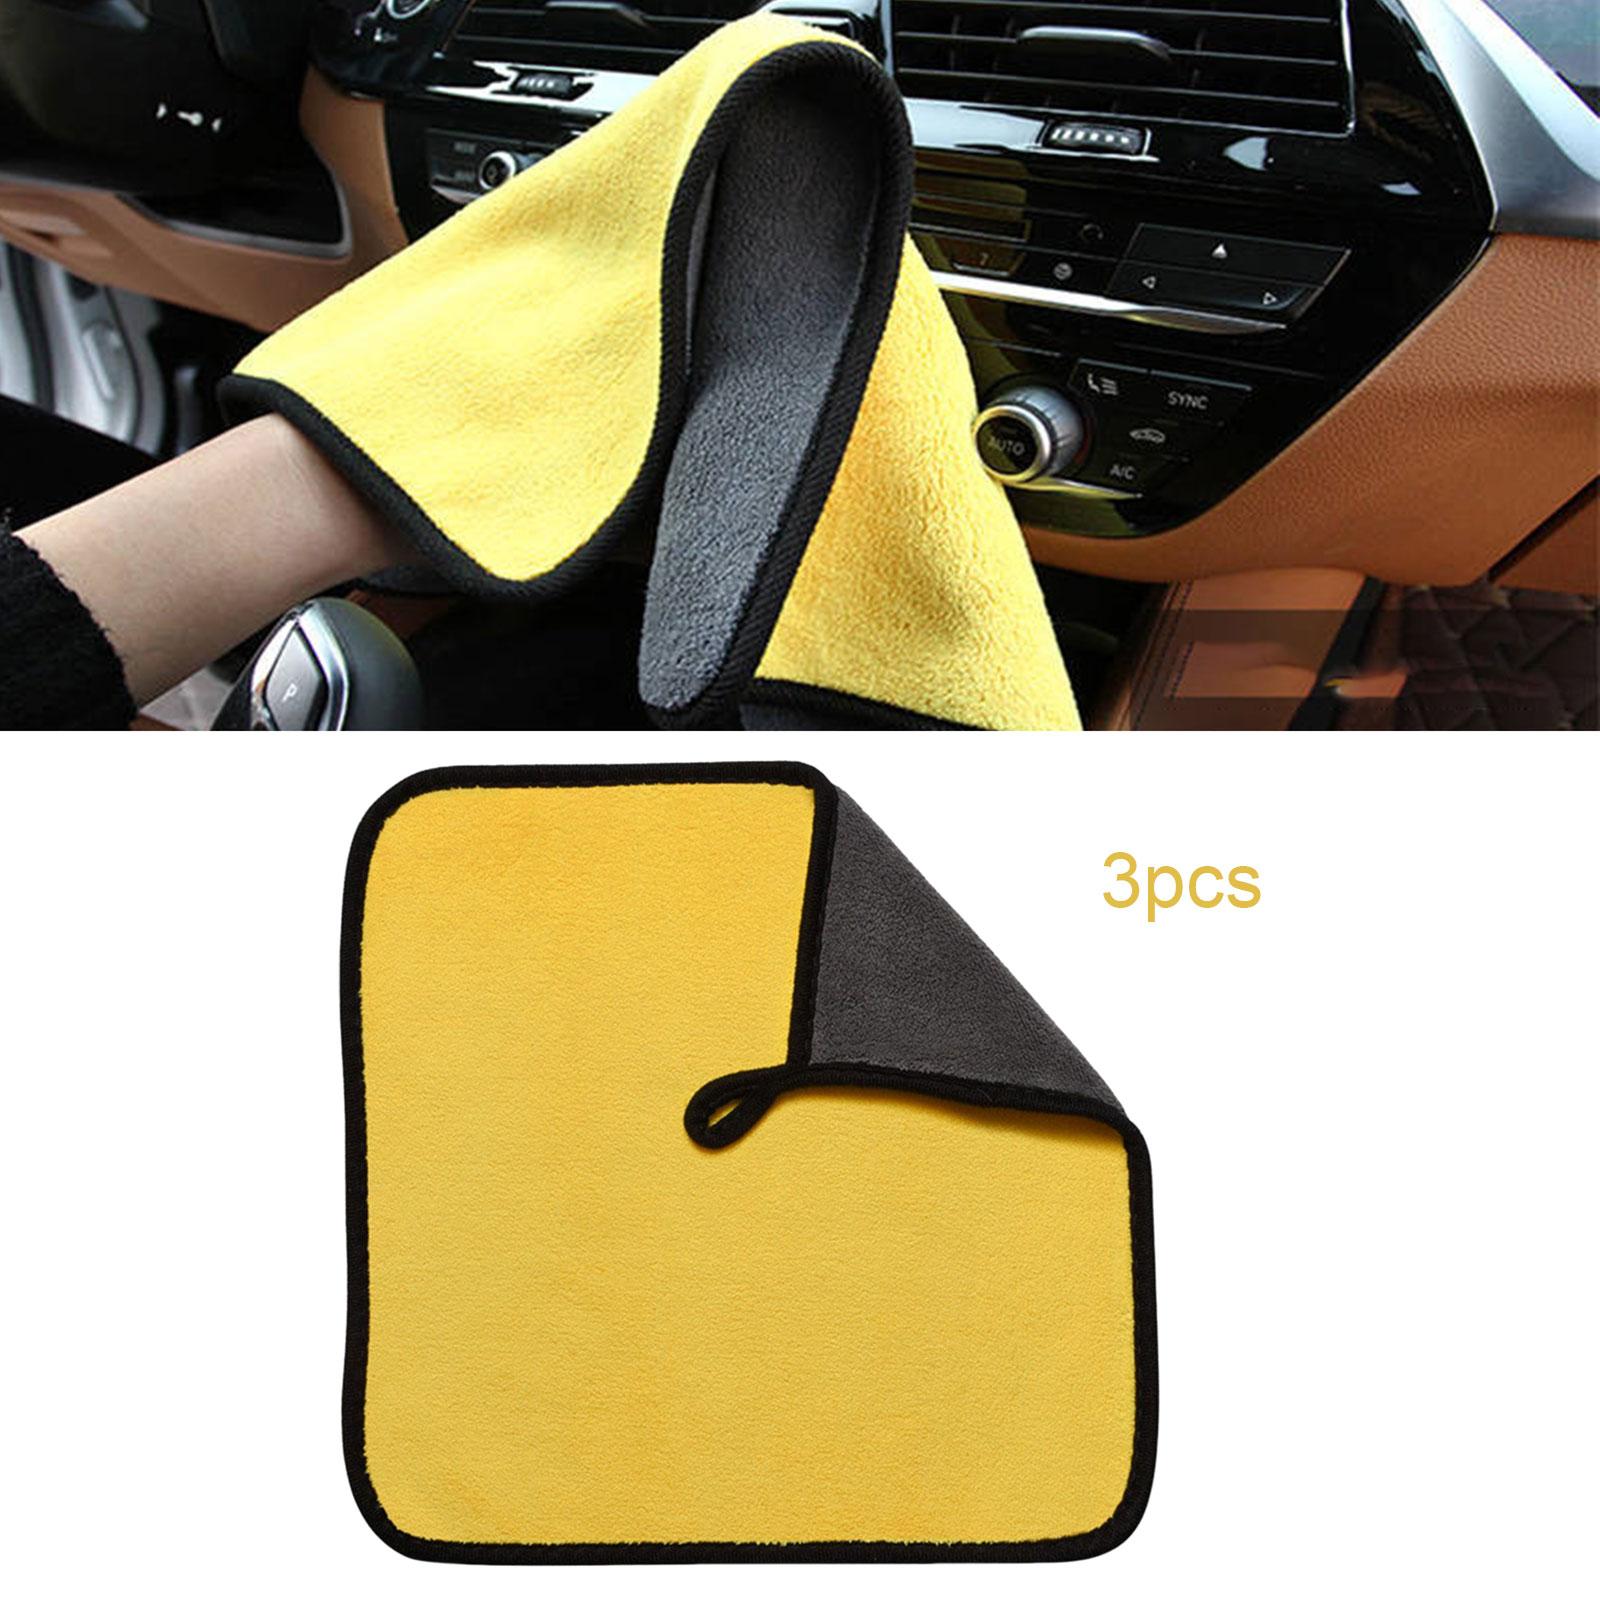 3 Pieces Car Microfiber Cleaning Towel Auto Detailing Cleaning 30cmx30cm